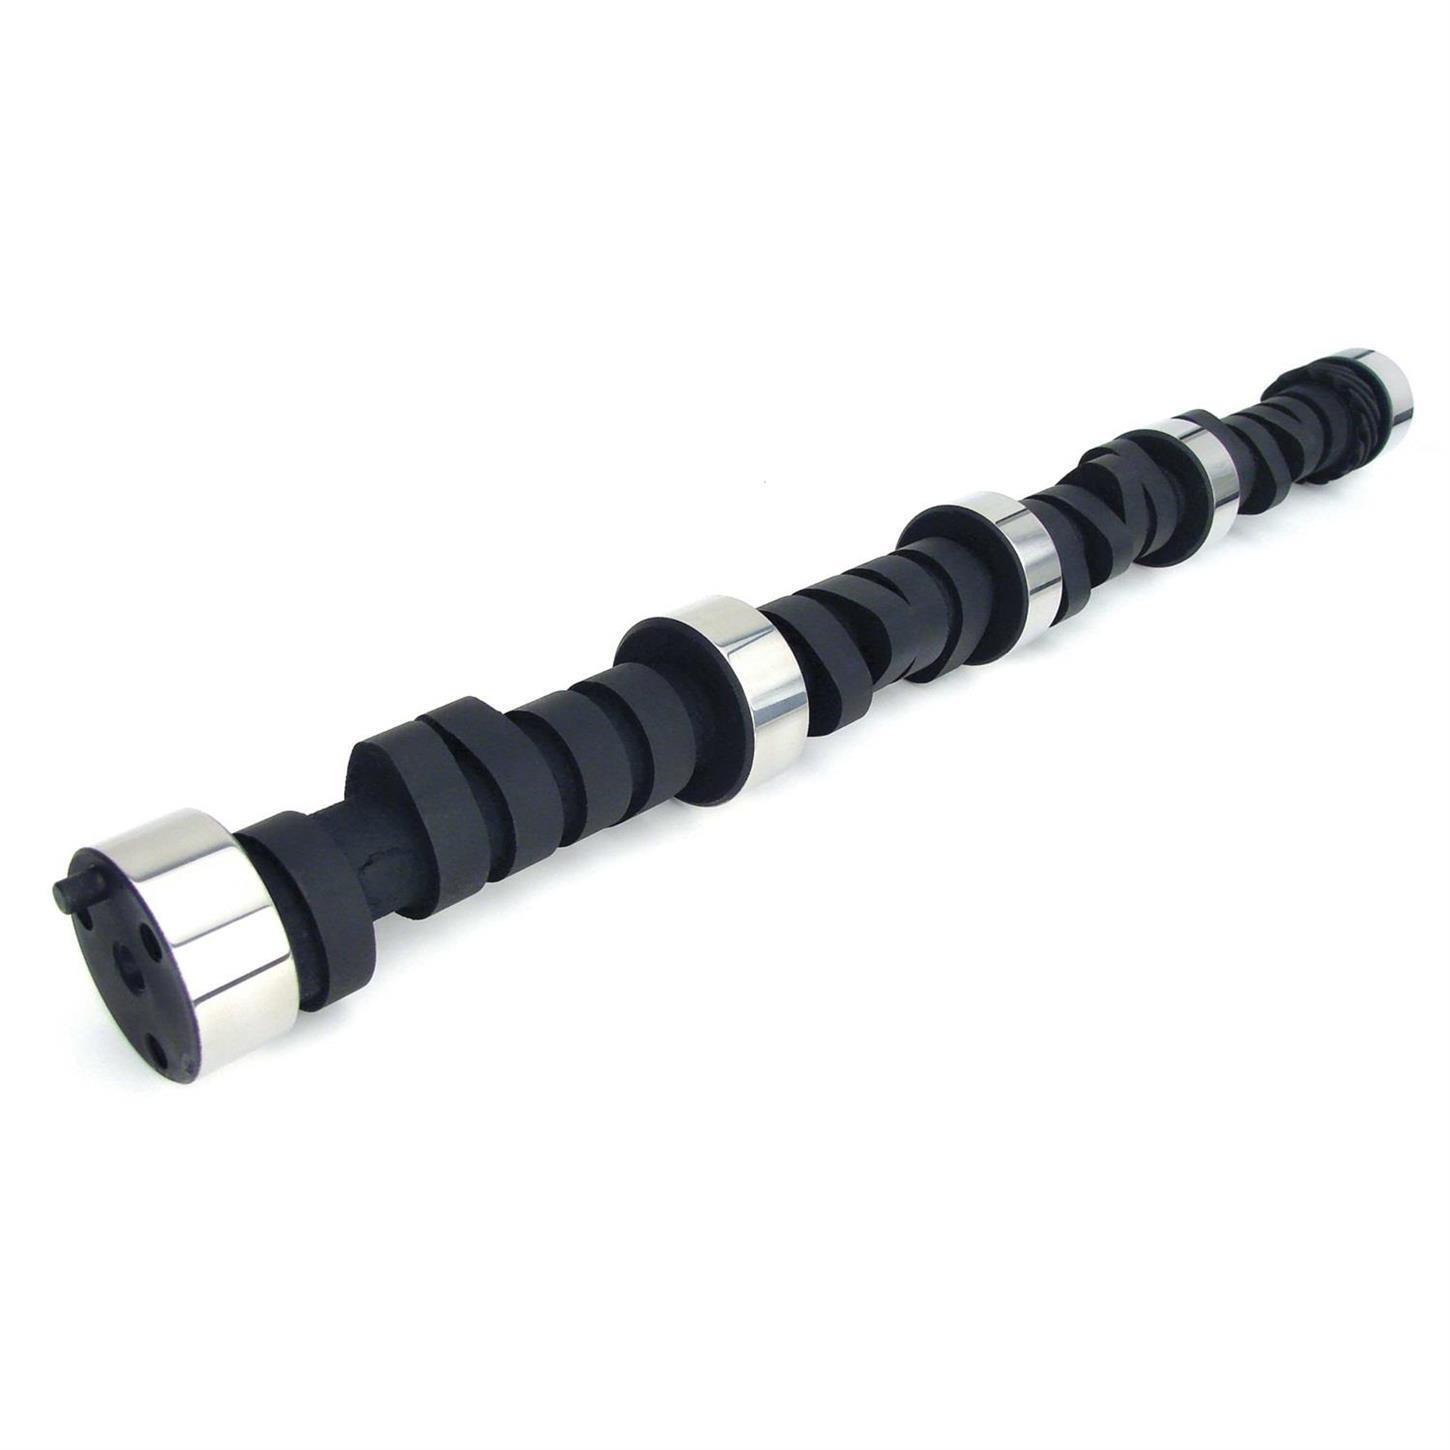 COMP Cams 12-232-3 Xtreme Marine Hydraulic Camshaft, Fits Chevy S/B